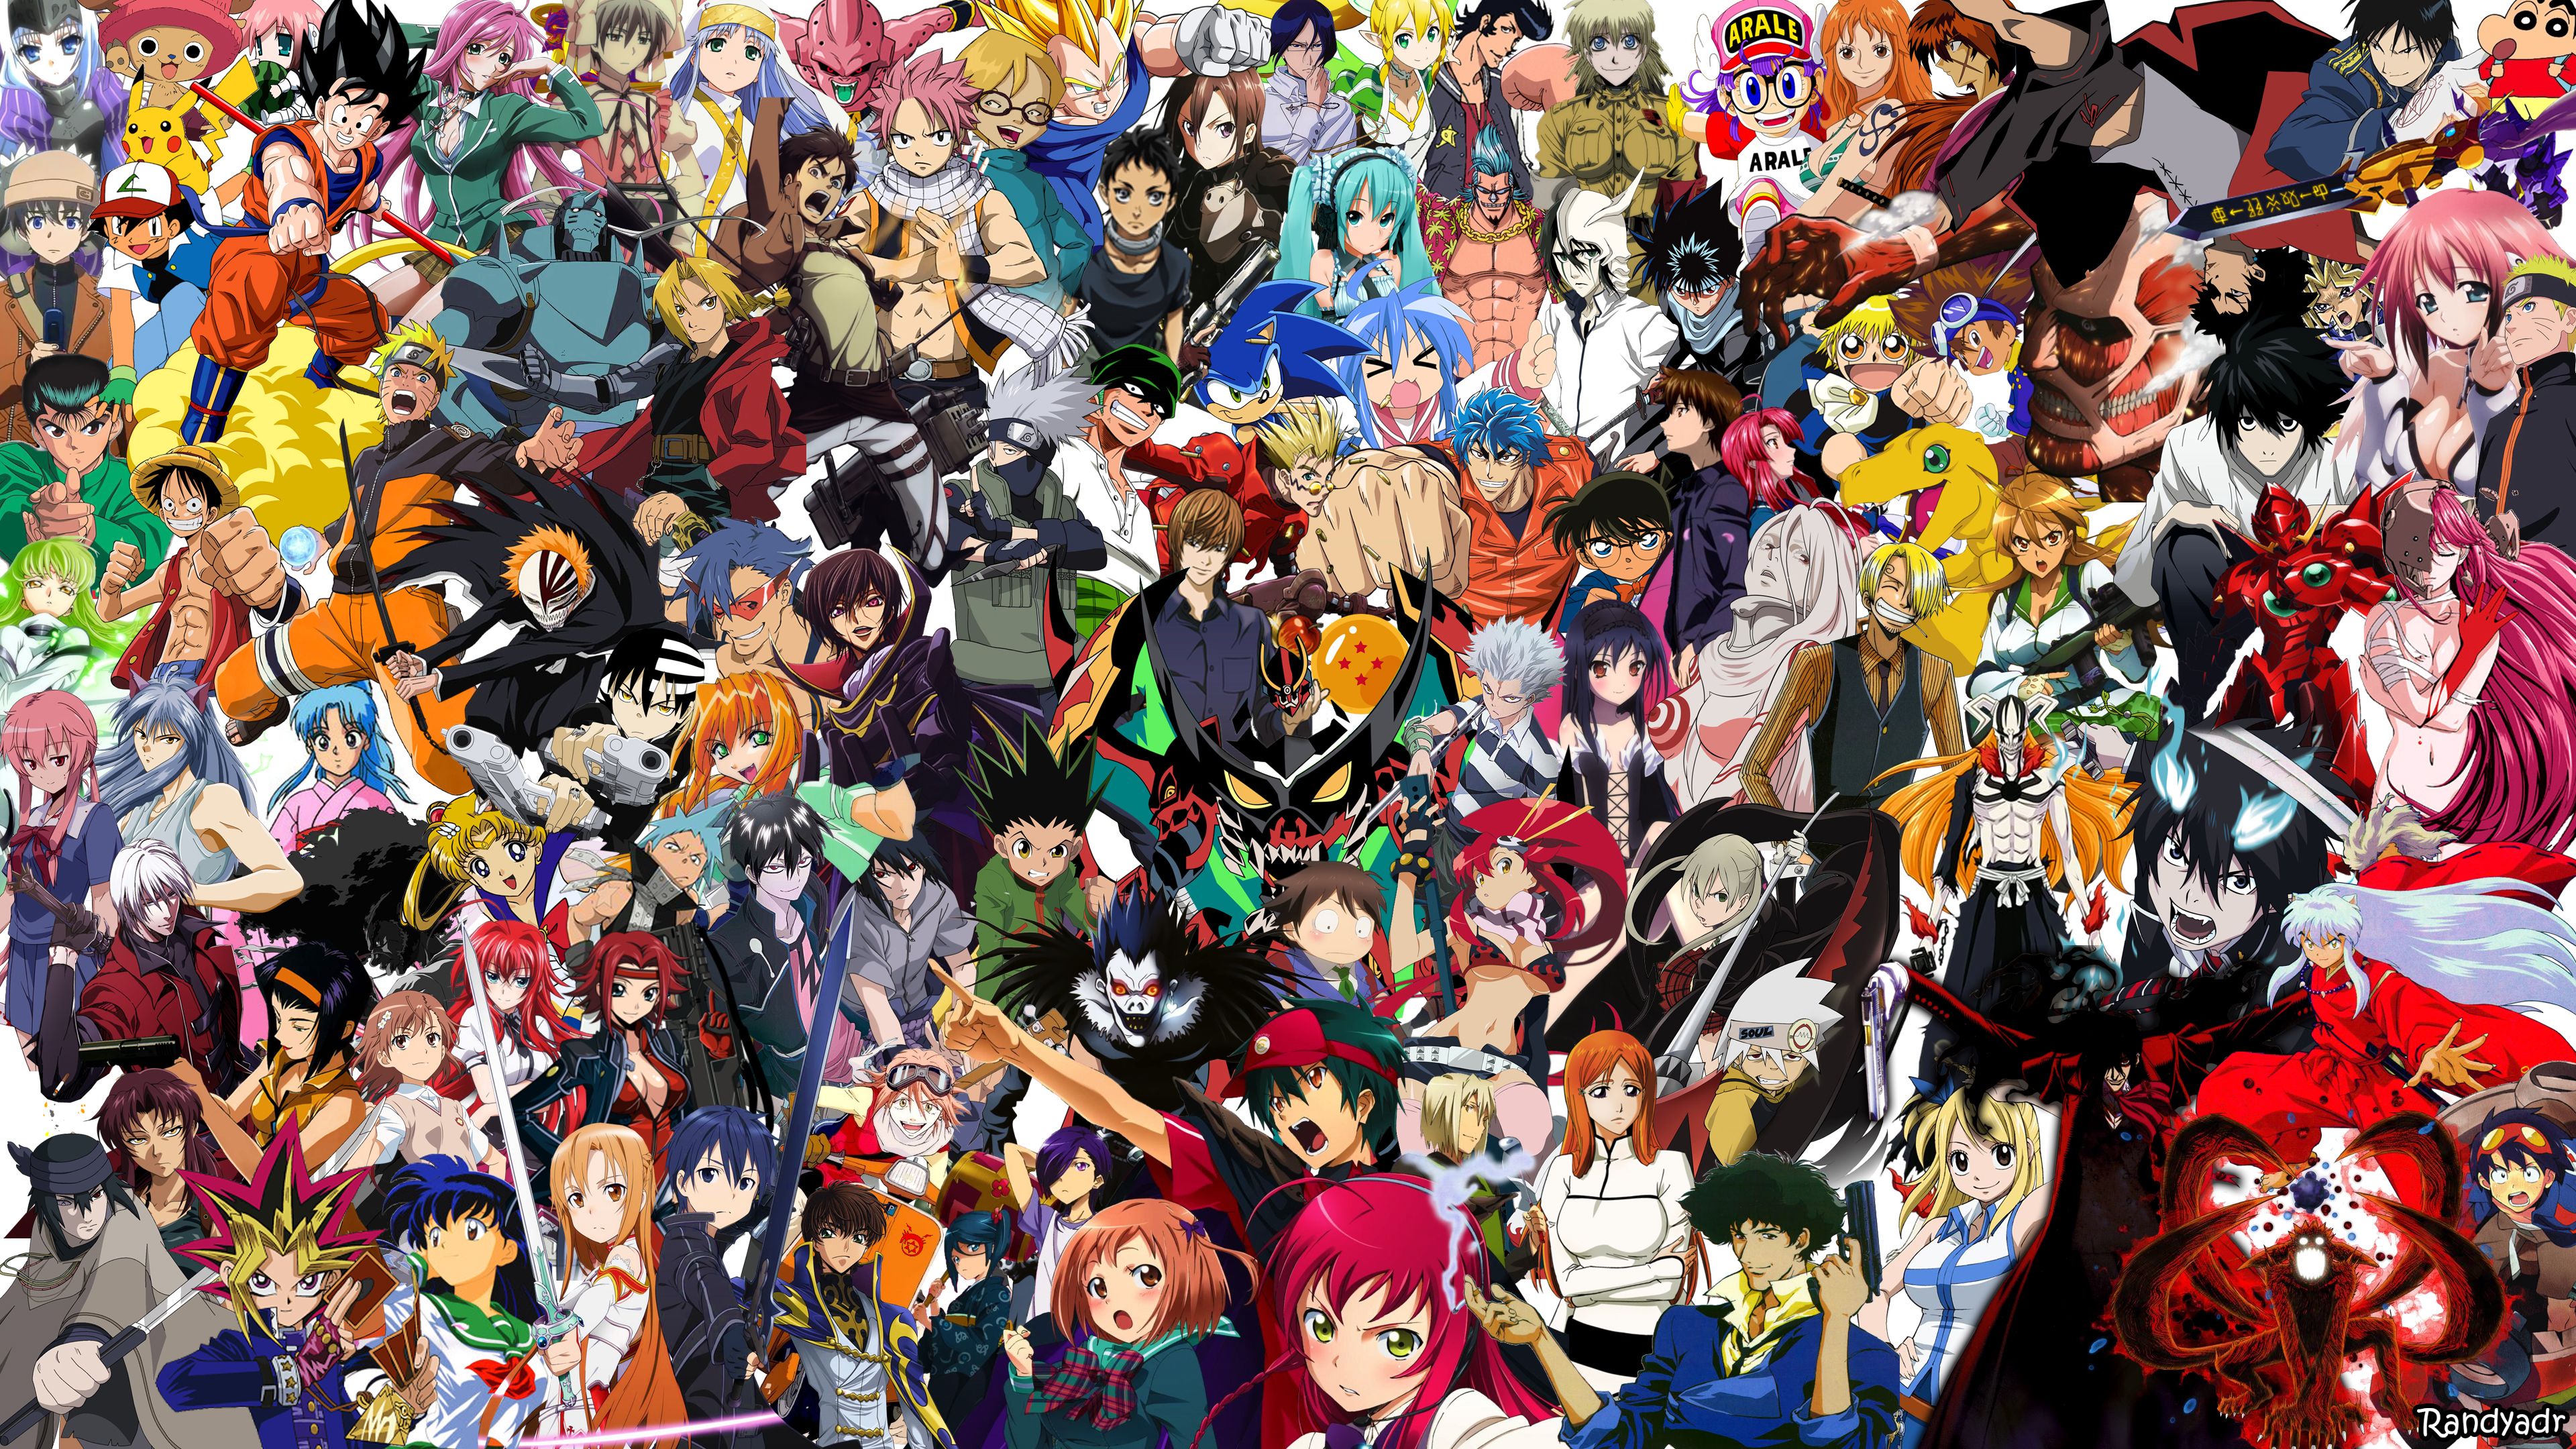 Miscellaneous anime characters in a collage